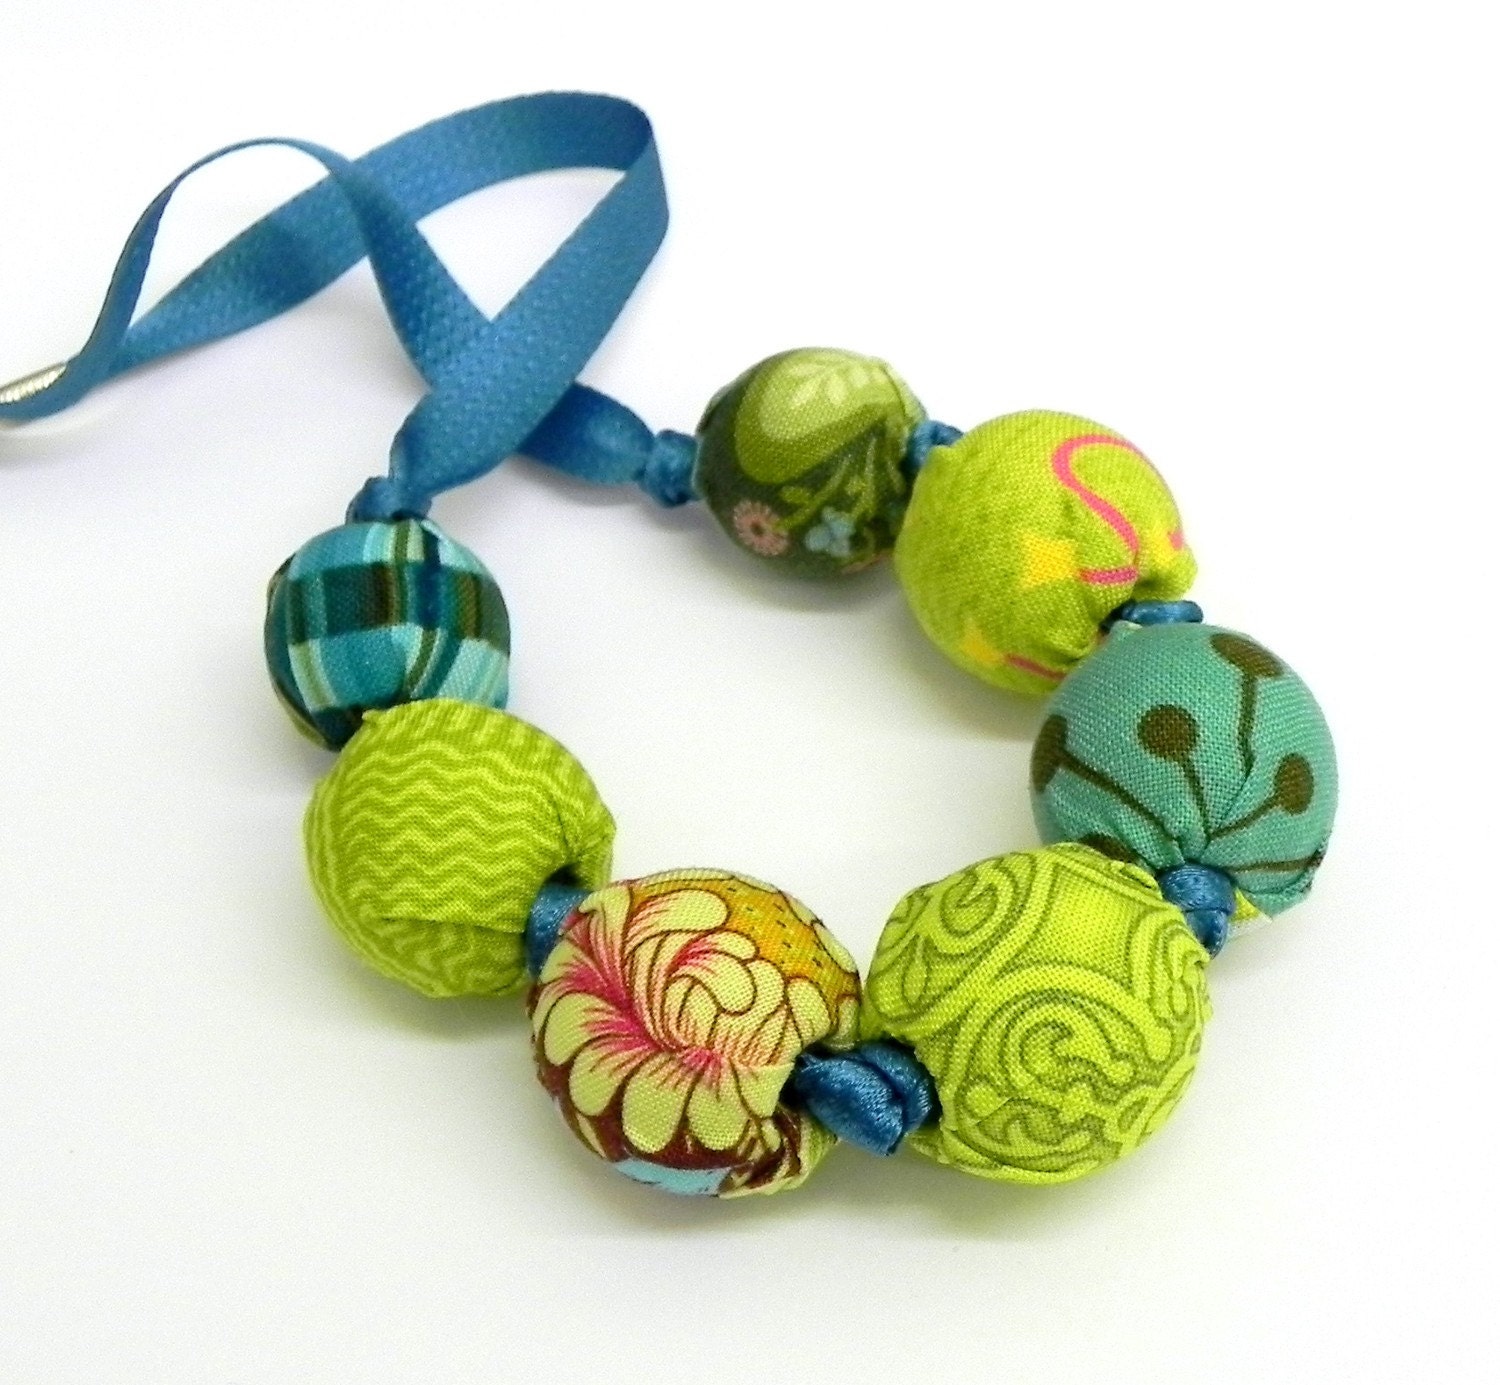 Fabric Necklace - Handmade beads - Turquoise and Lime green